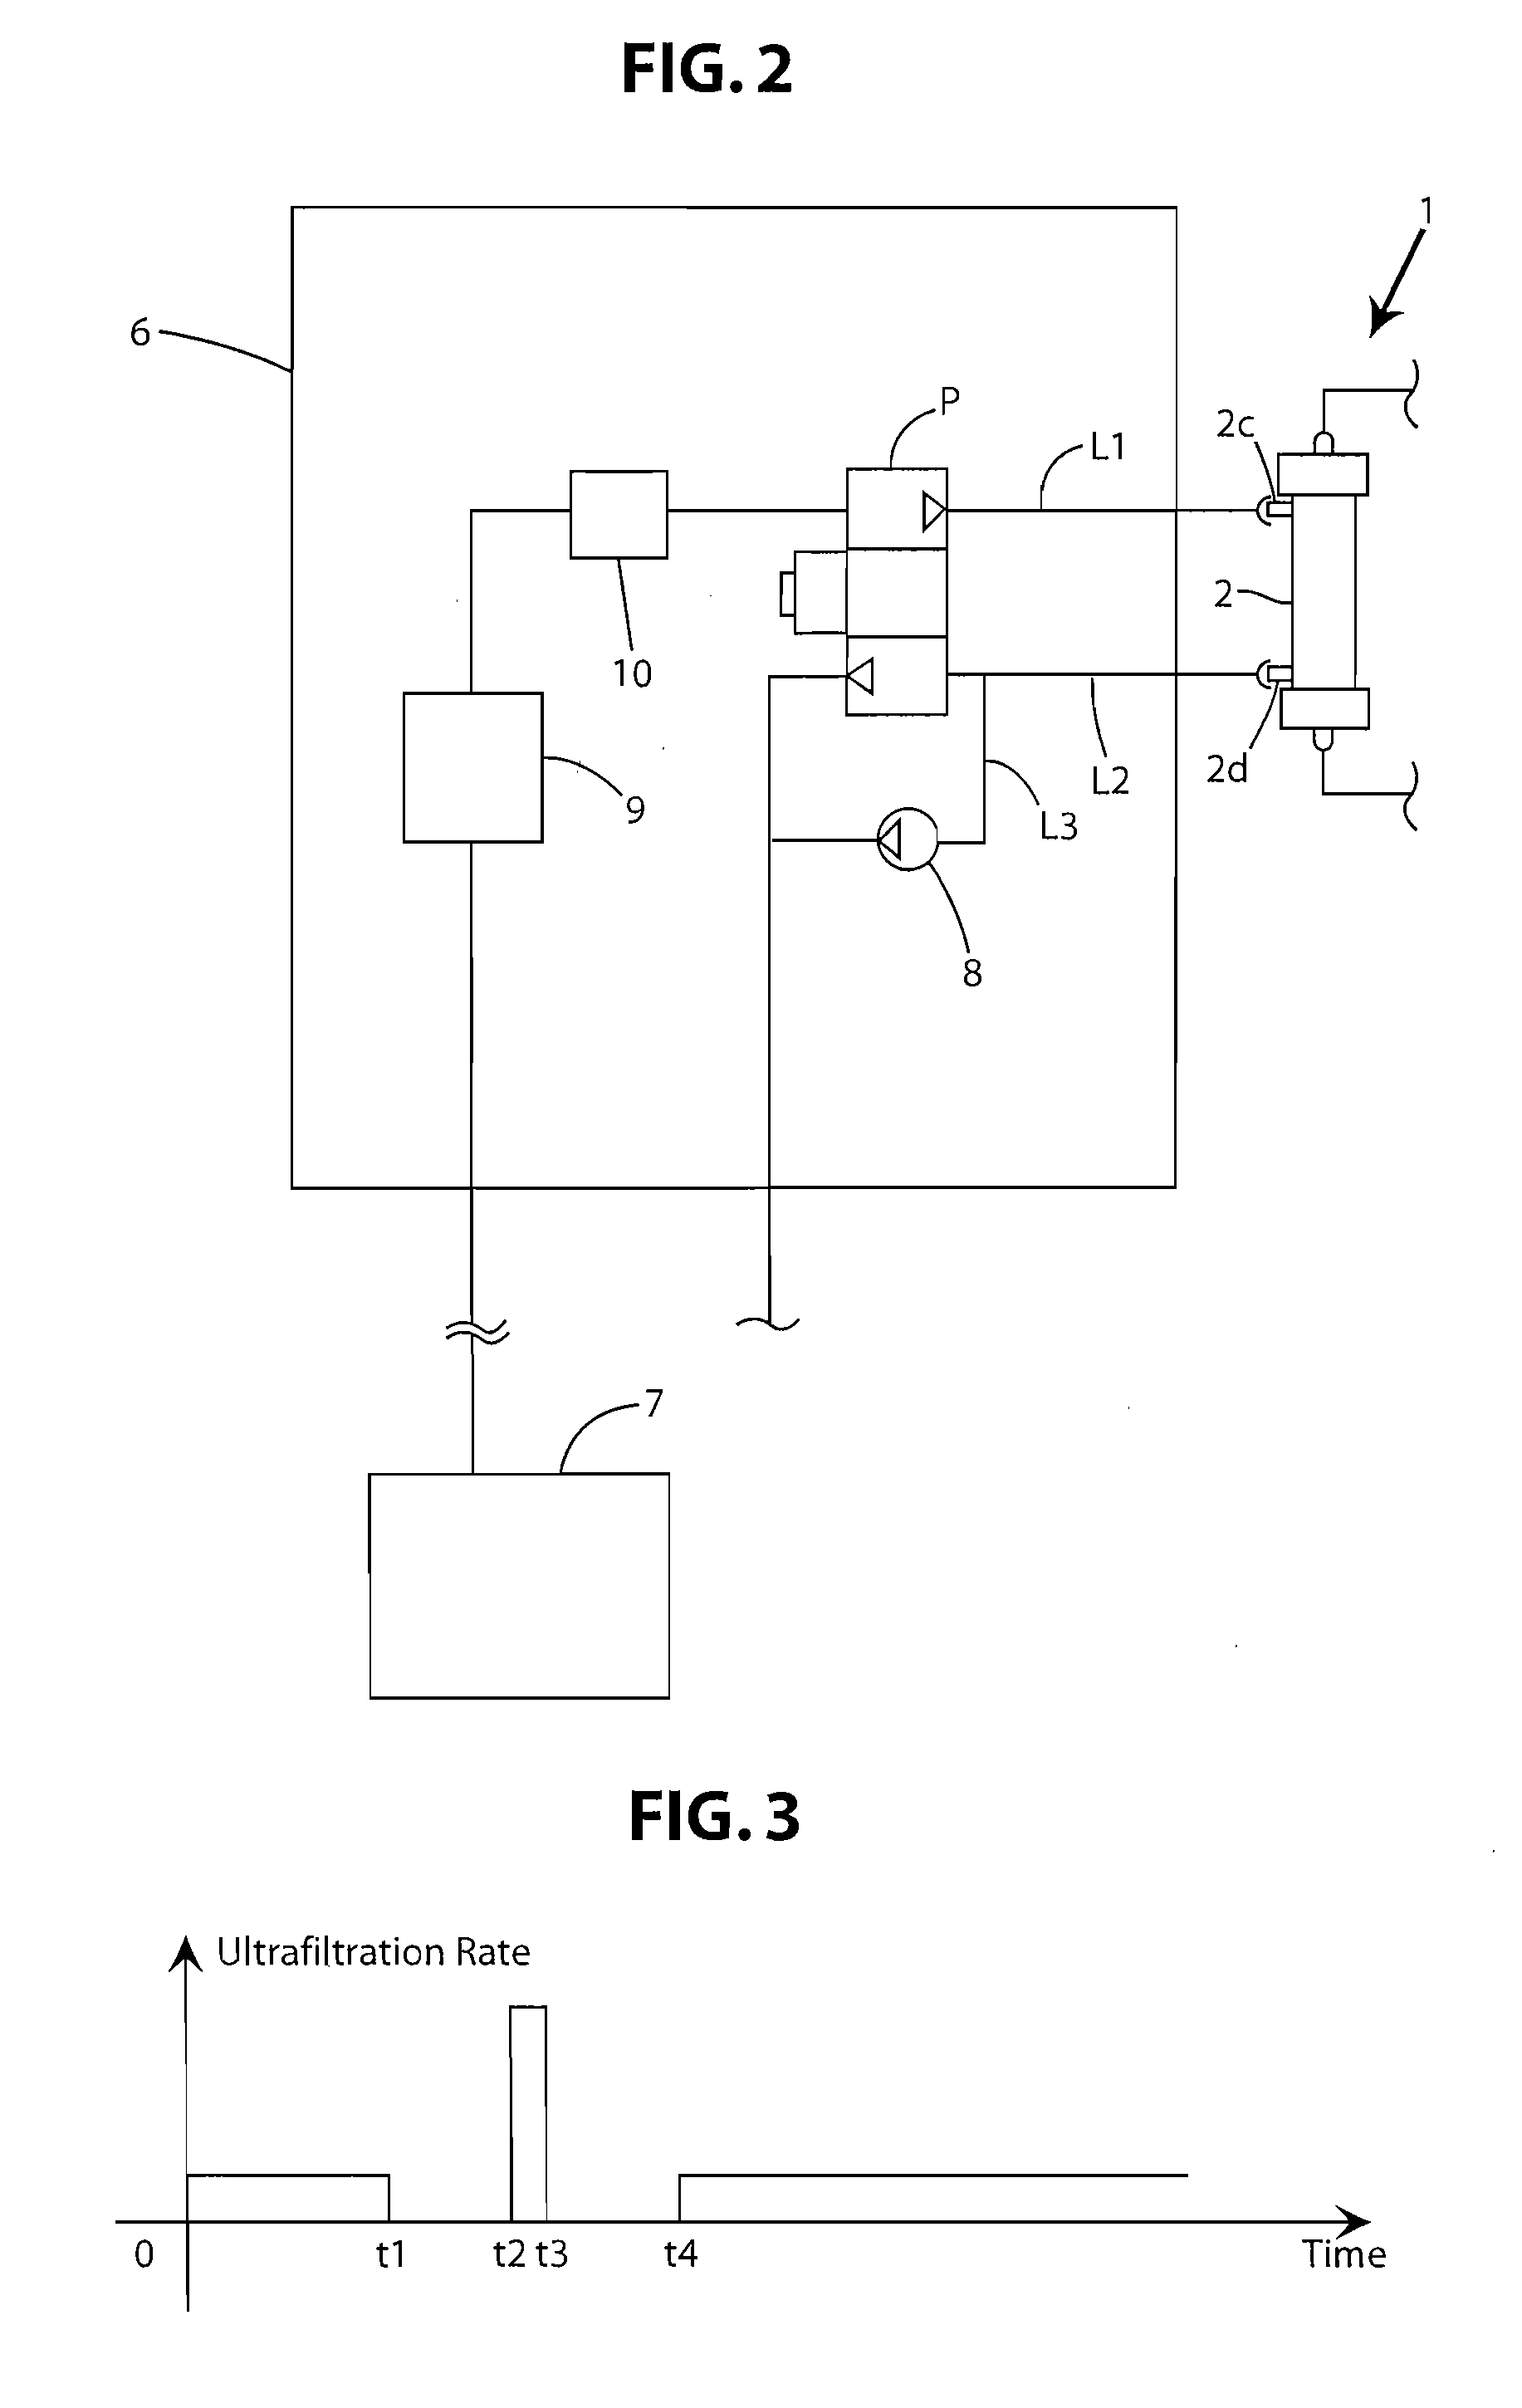 Blood purification apparatus and method for calculating a recirculation rate for the blood purification apparatus